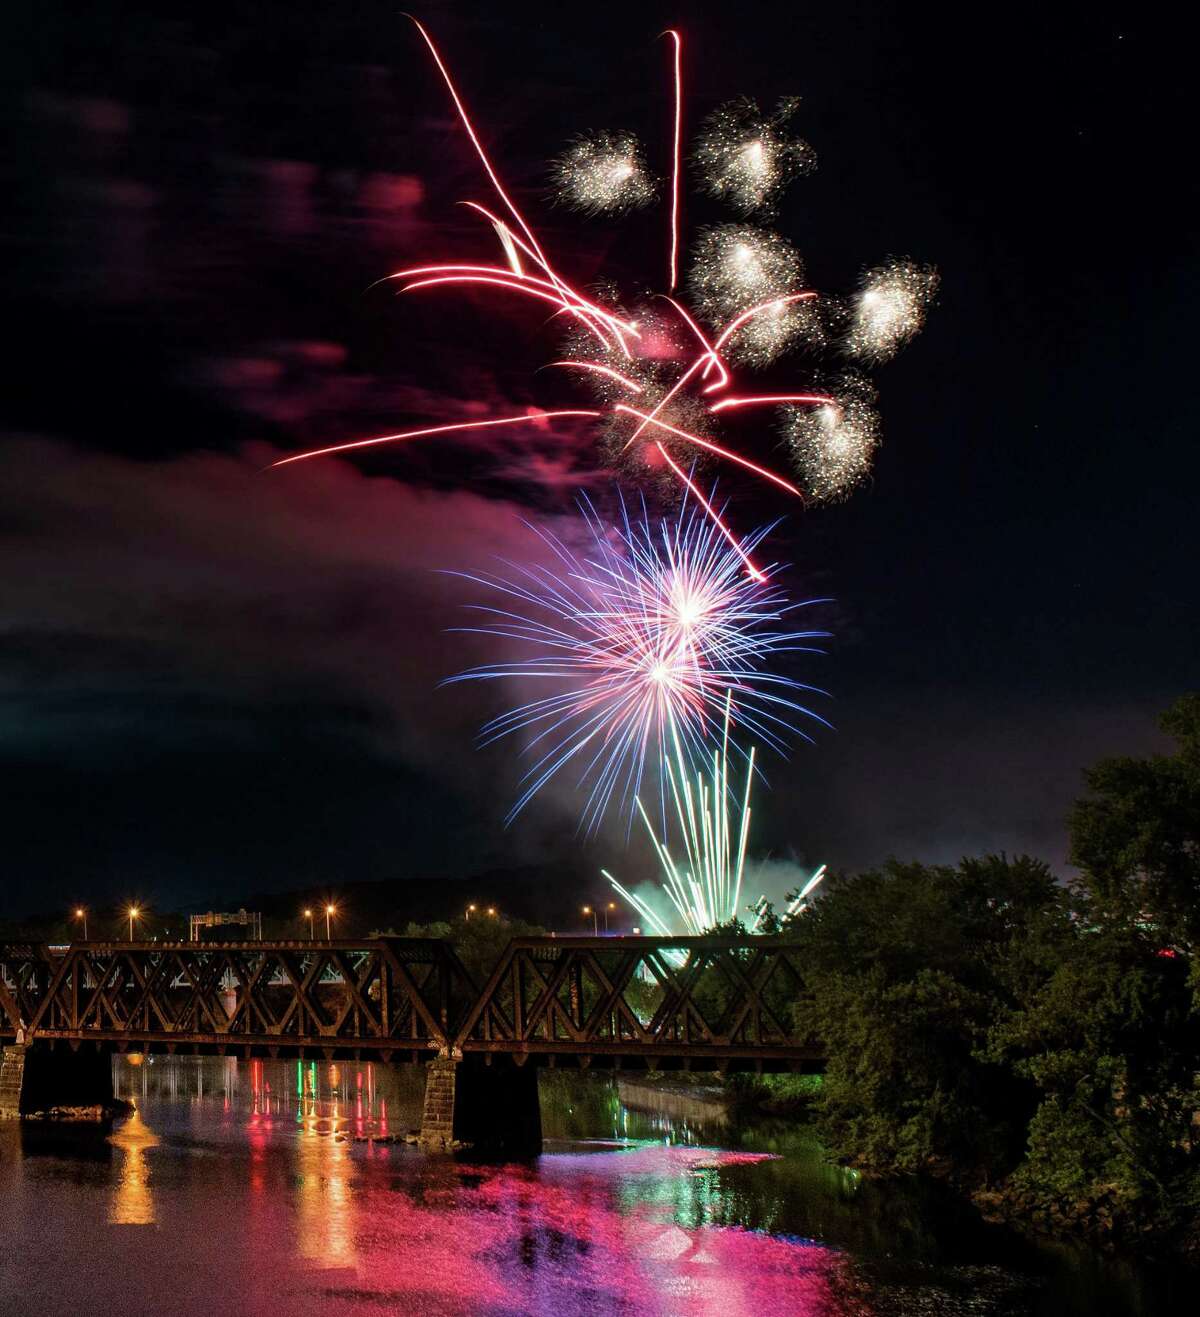 Shelton and Derby 4th of July celebration fireworks seen over the Housatonic River in Shelton, Conn. Shelton / Derby fireworks on Wednesday, July 3, 2019 in Shelton, Conn.